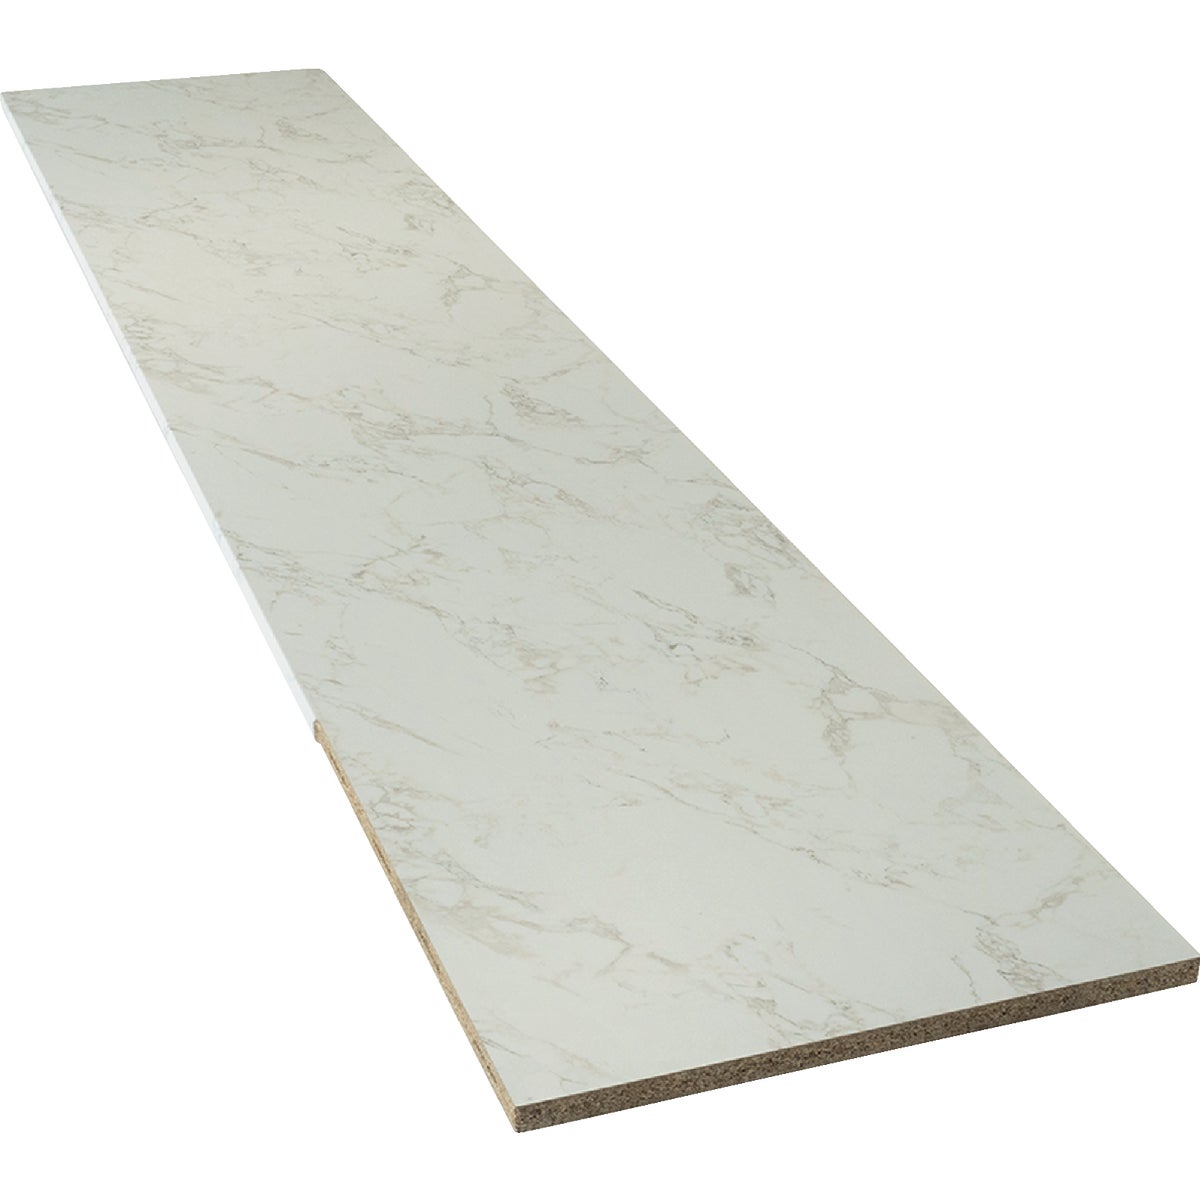 VT Industries Stretta 6 Ft. Right Hand Laminate White Marble Countertop